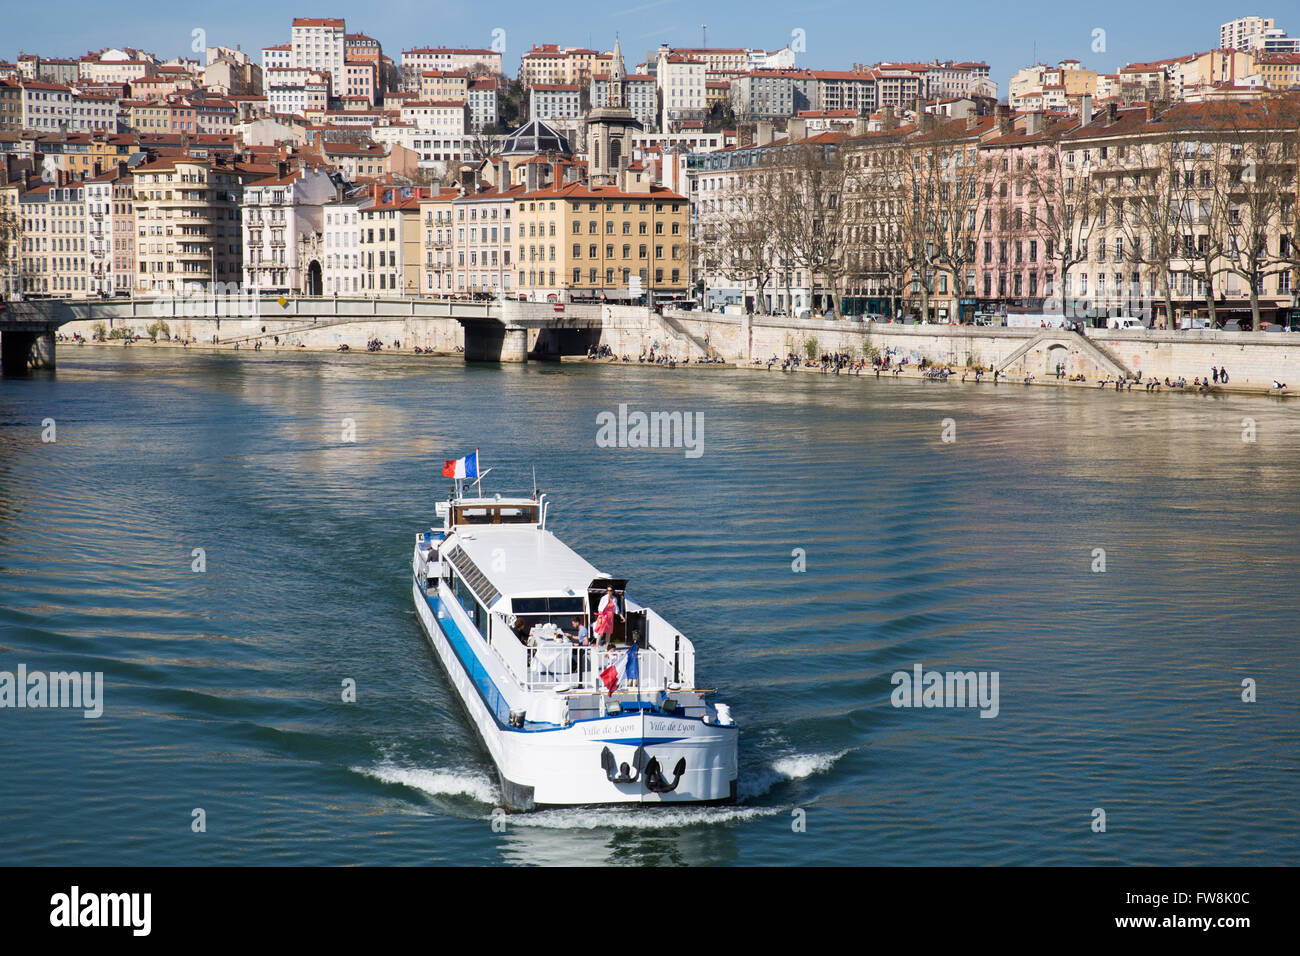 Lyon, France - March 26, 2016: Boat moving down the Saone river in the city of Lyon. Stock Photo